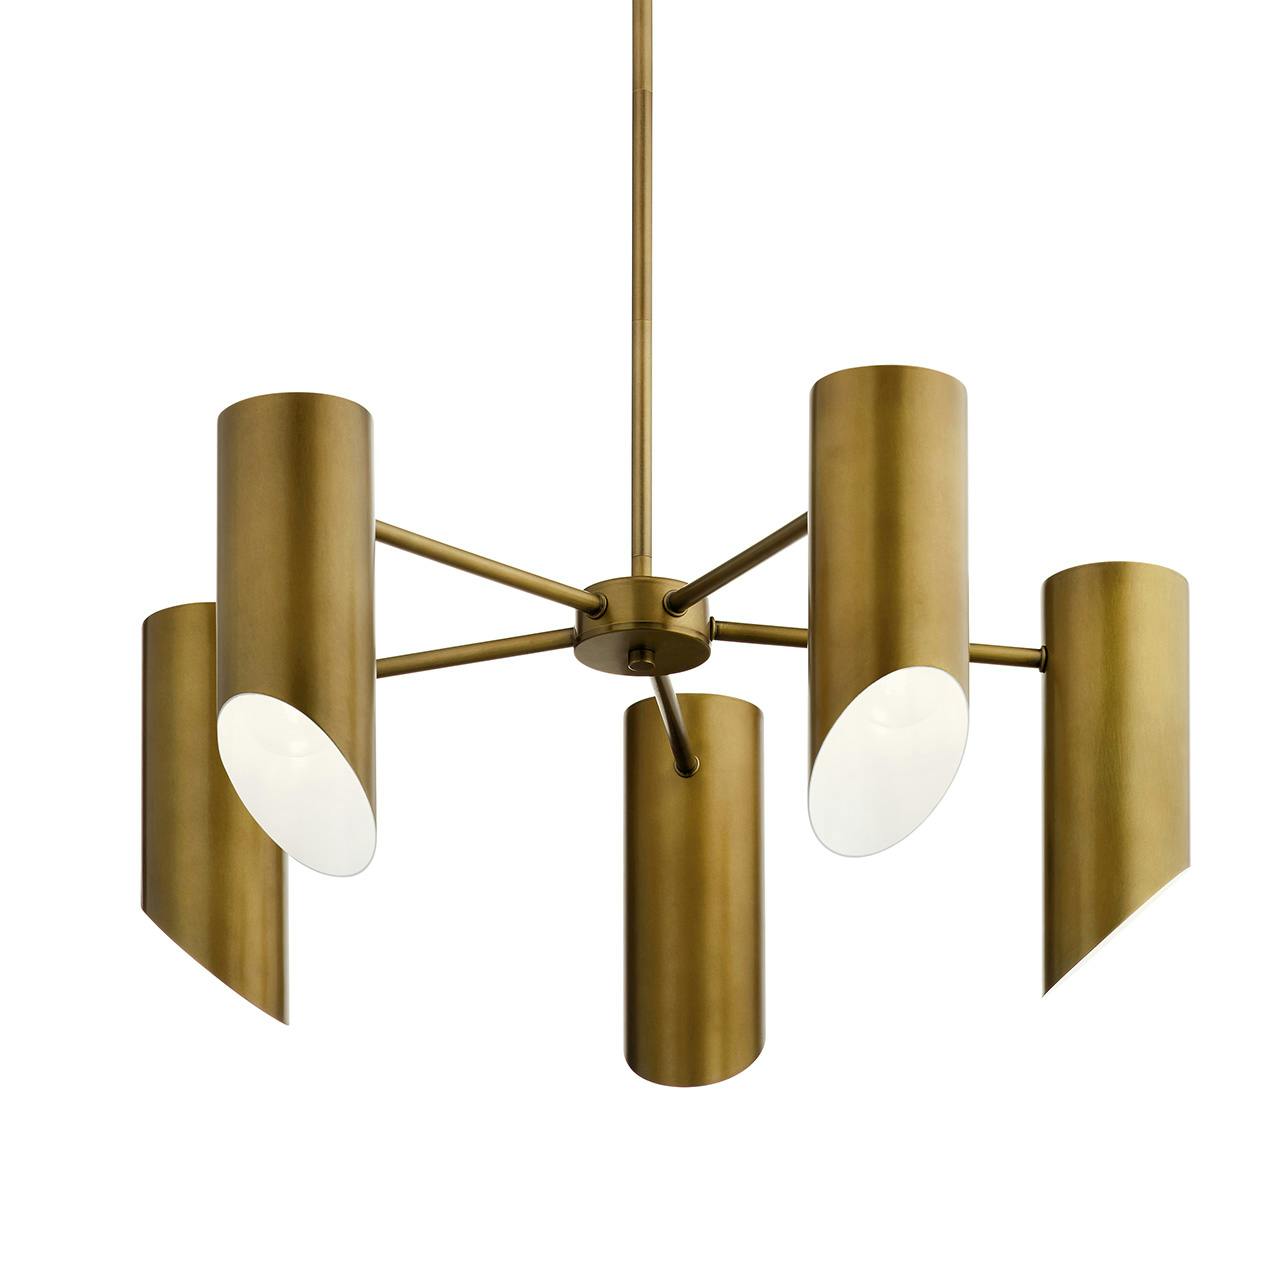 Trentino 5 Light Chandelier Natural Brass without the canopy on a white background